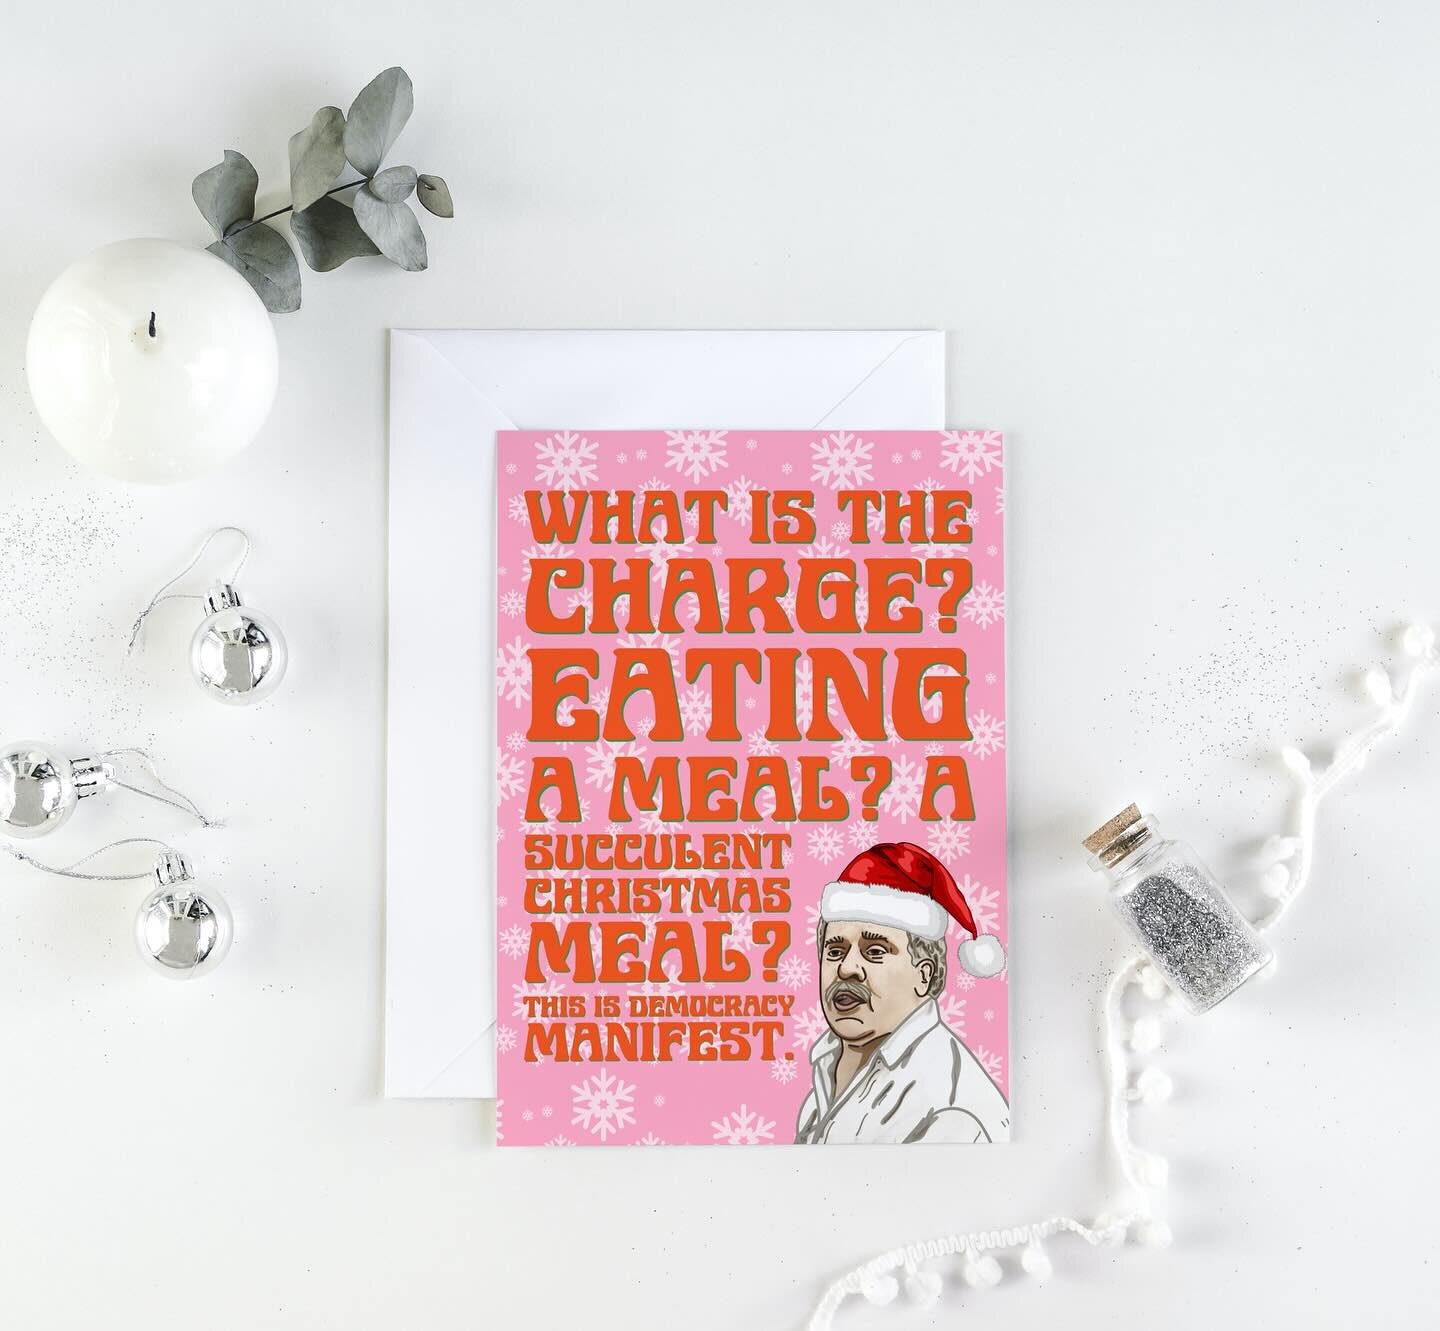 Free card to the first person who gets this meme reference 😎🎄 all my Christmas cards will be going live this afternoon, over on BeckyKayllDesigns.com 💖